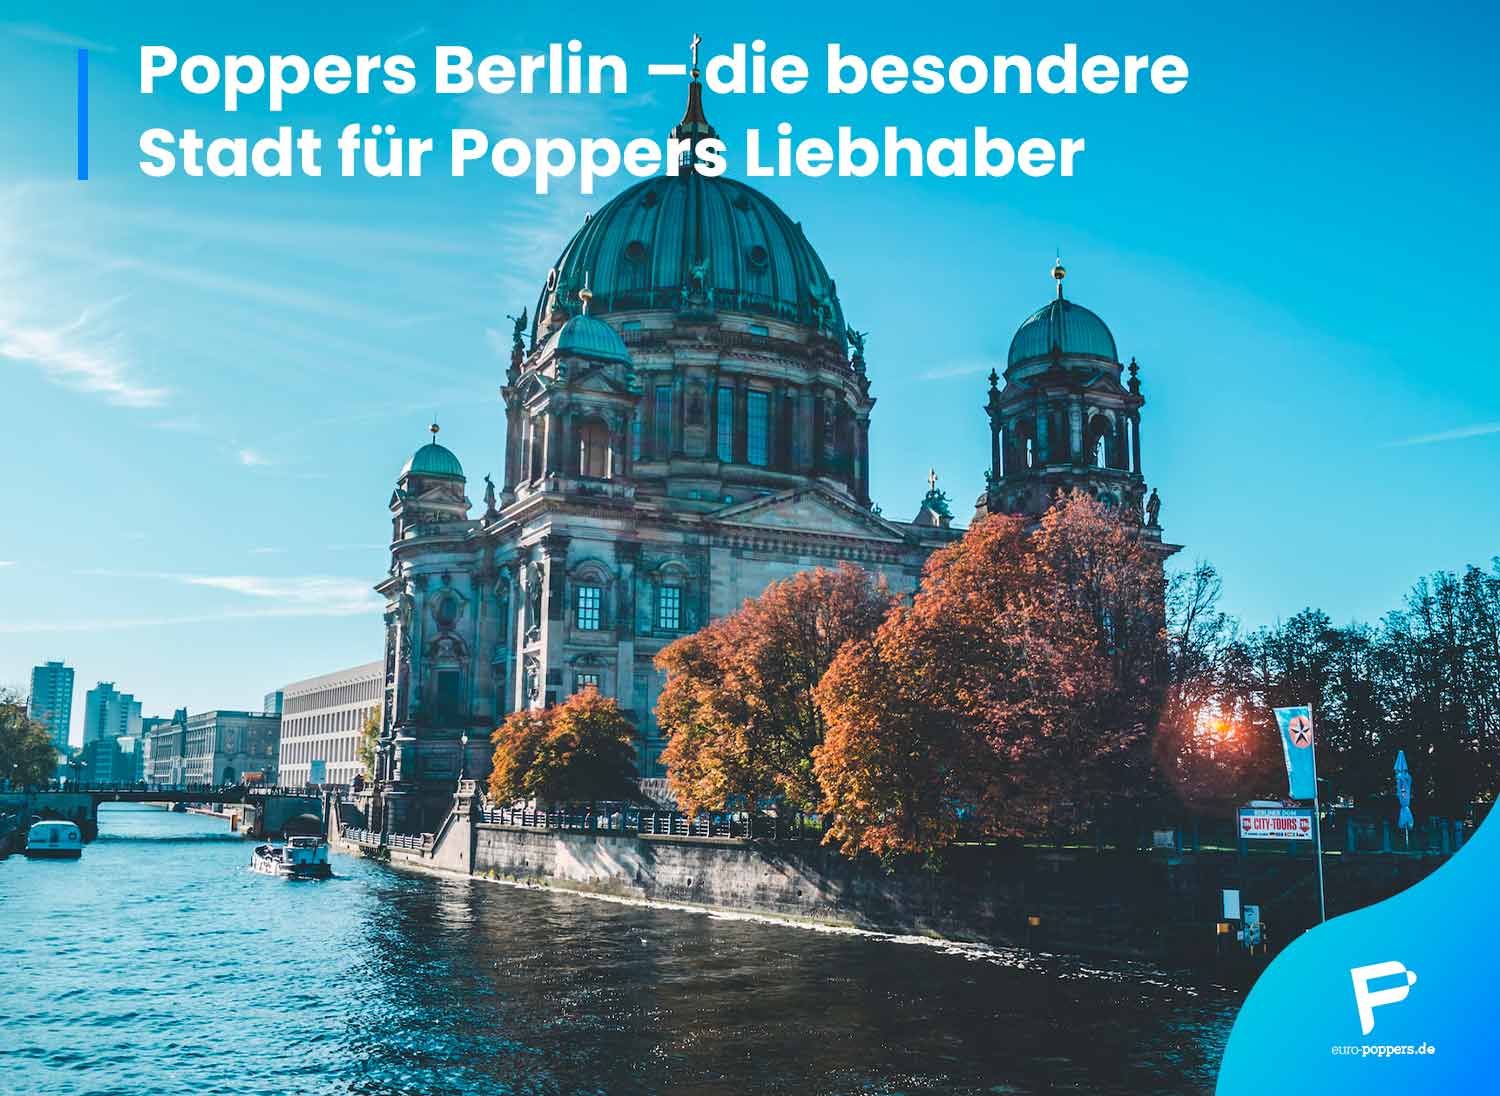 You are currently viewing Poppers Berlin – die besondere Stadt für Poppers Liebhaber